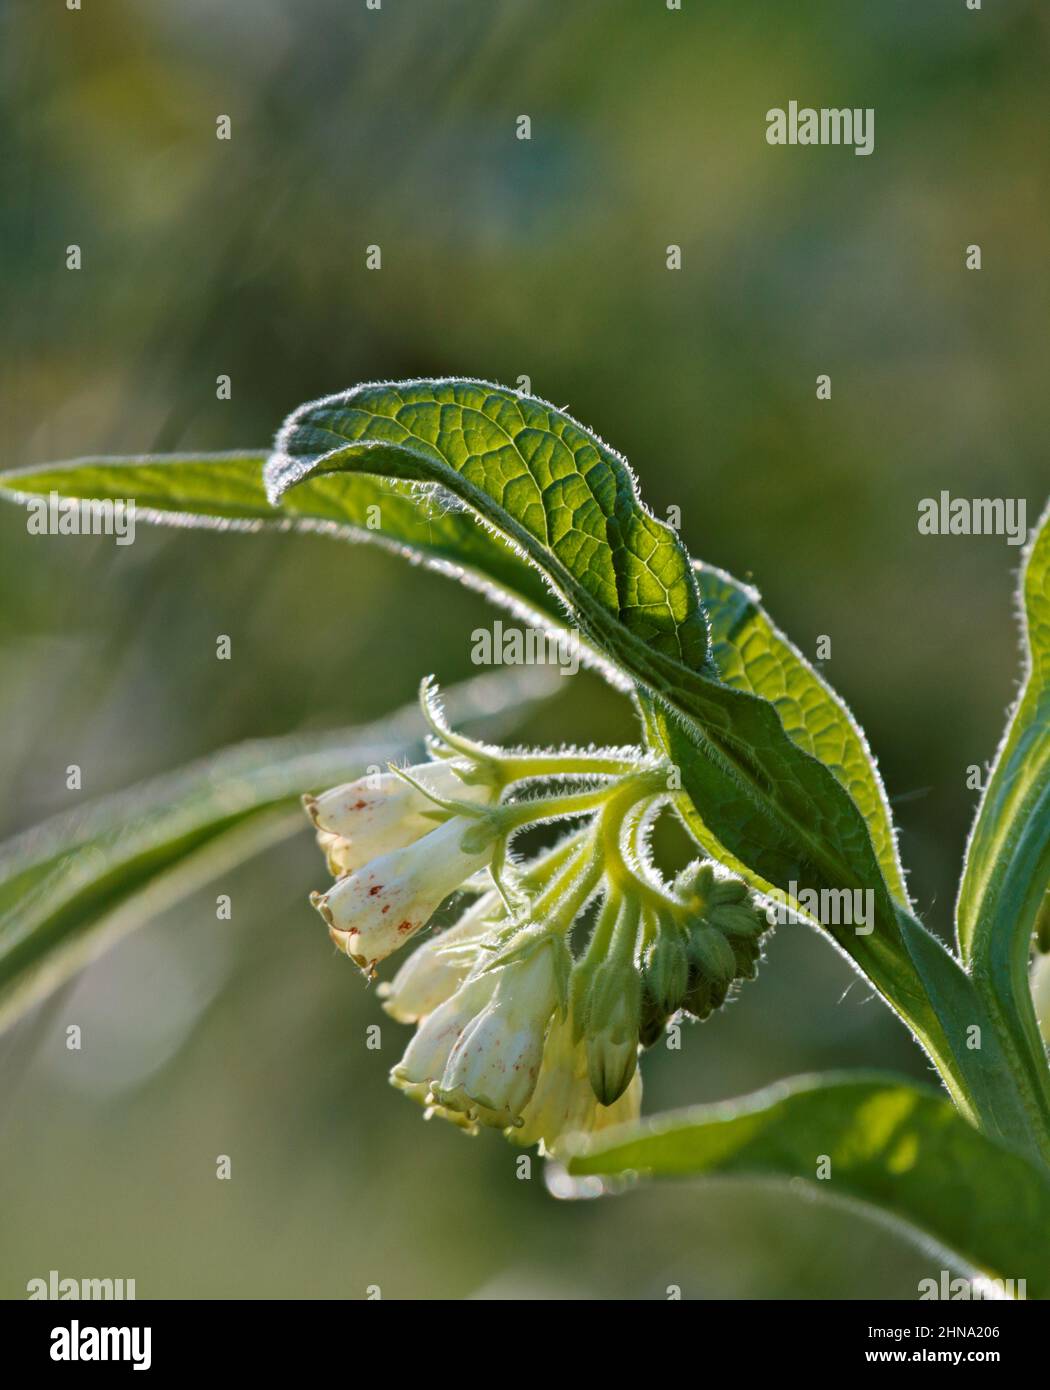 Comfrey, Symphytum officinale var.bohemicum is a wild plant with white or a bit yellowish flowers. Stock Photo